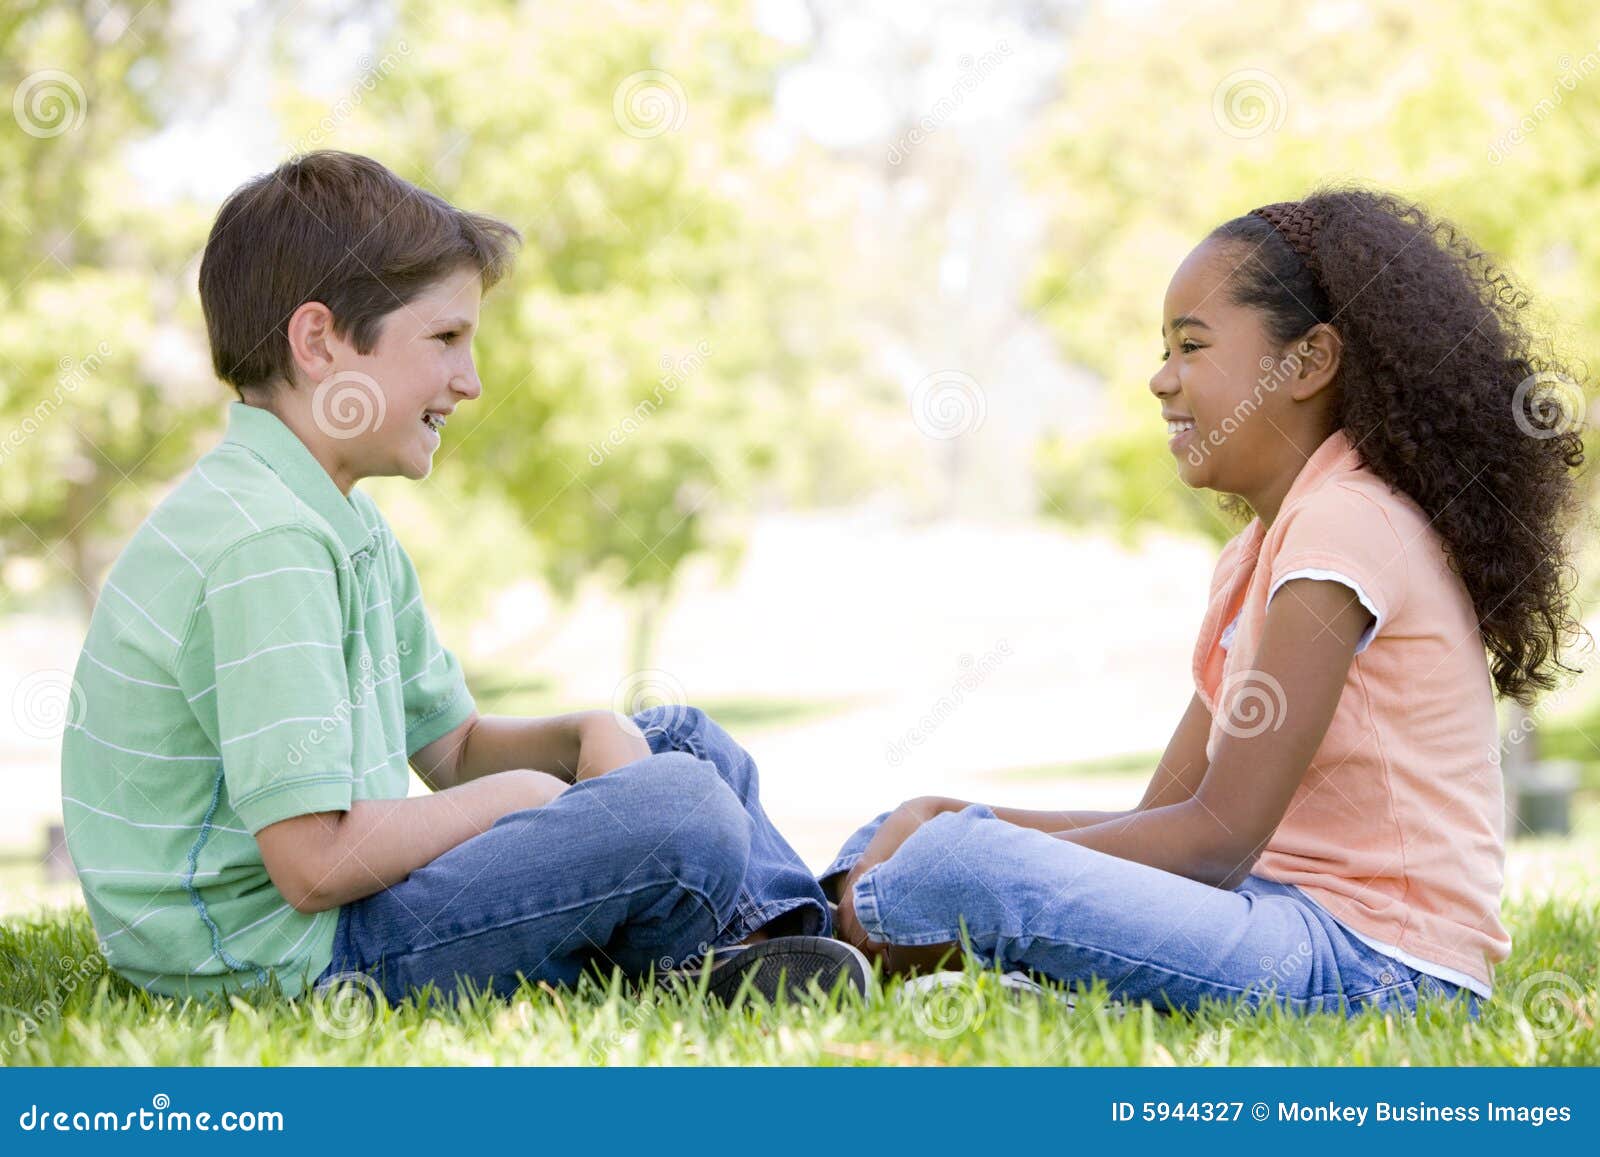 two young friends sitting outdoors looking at each